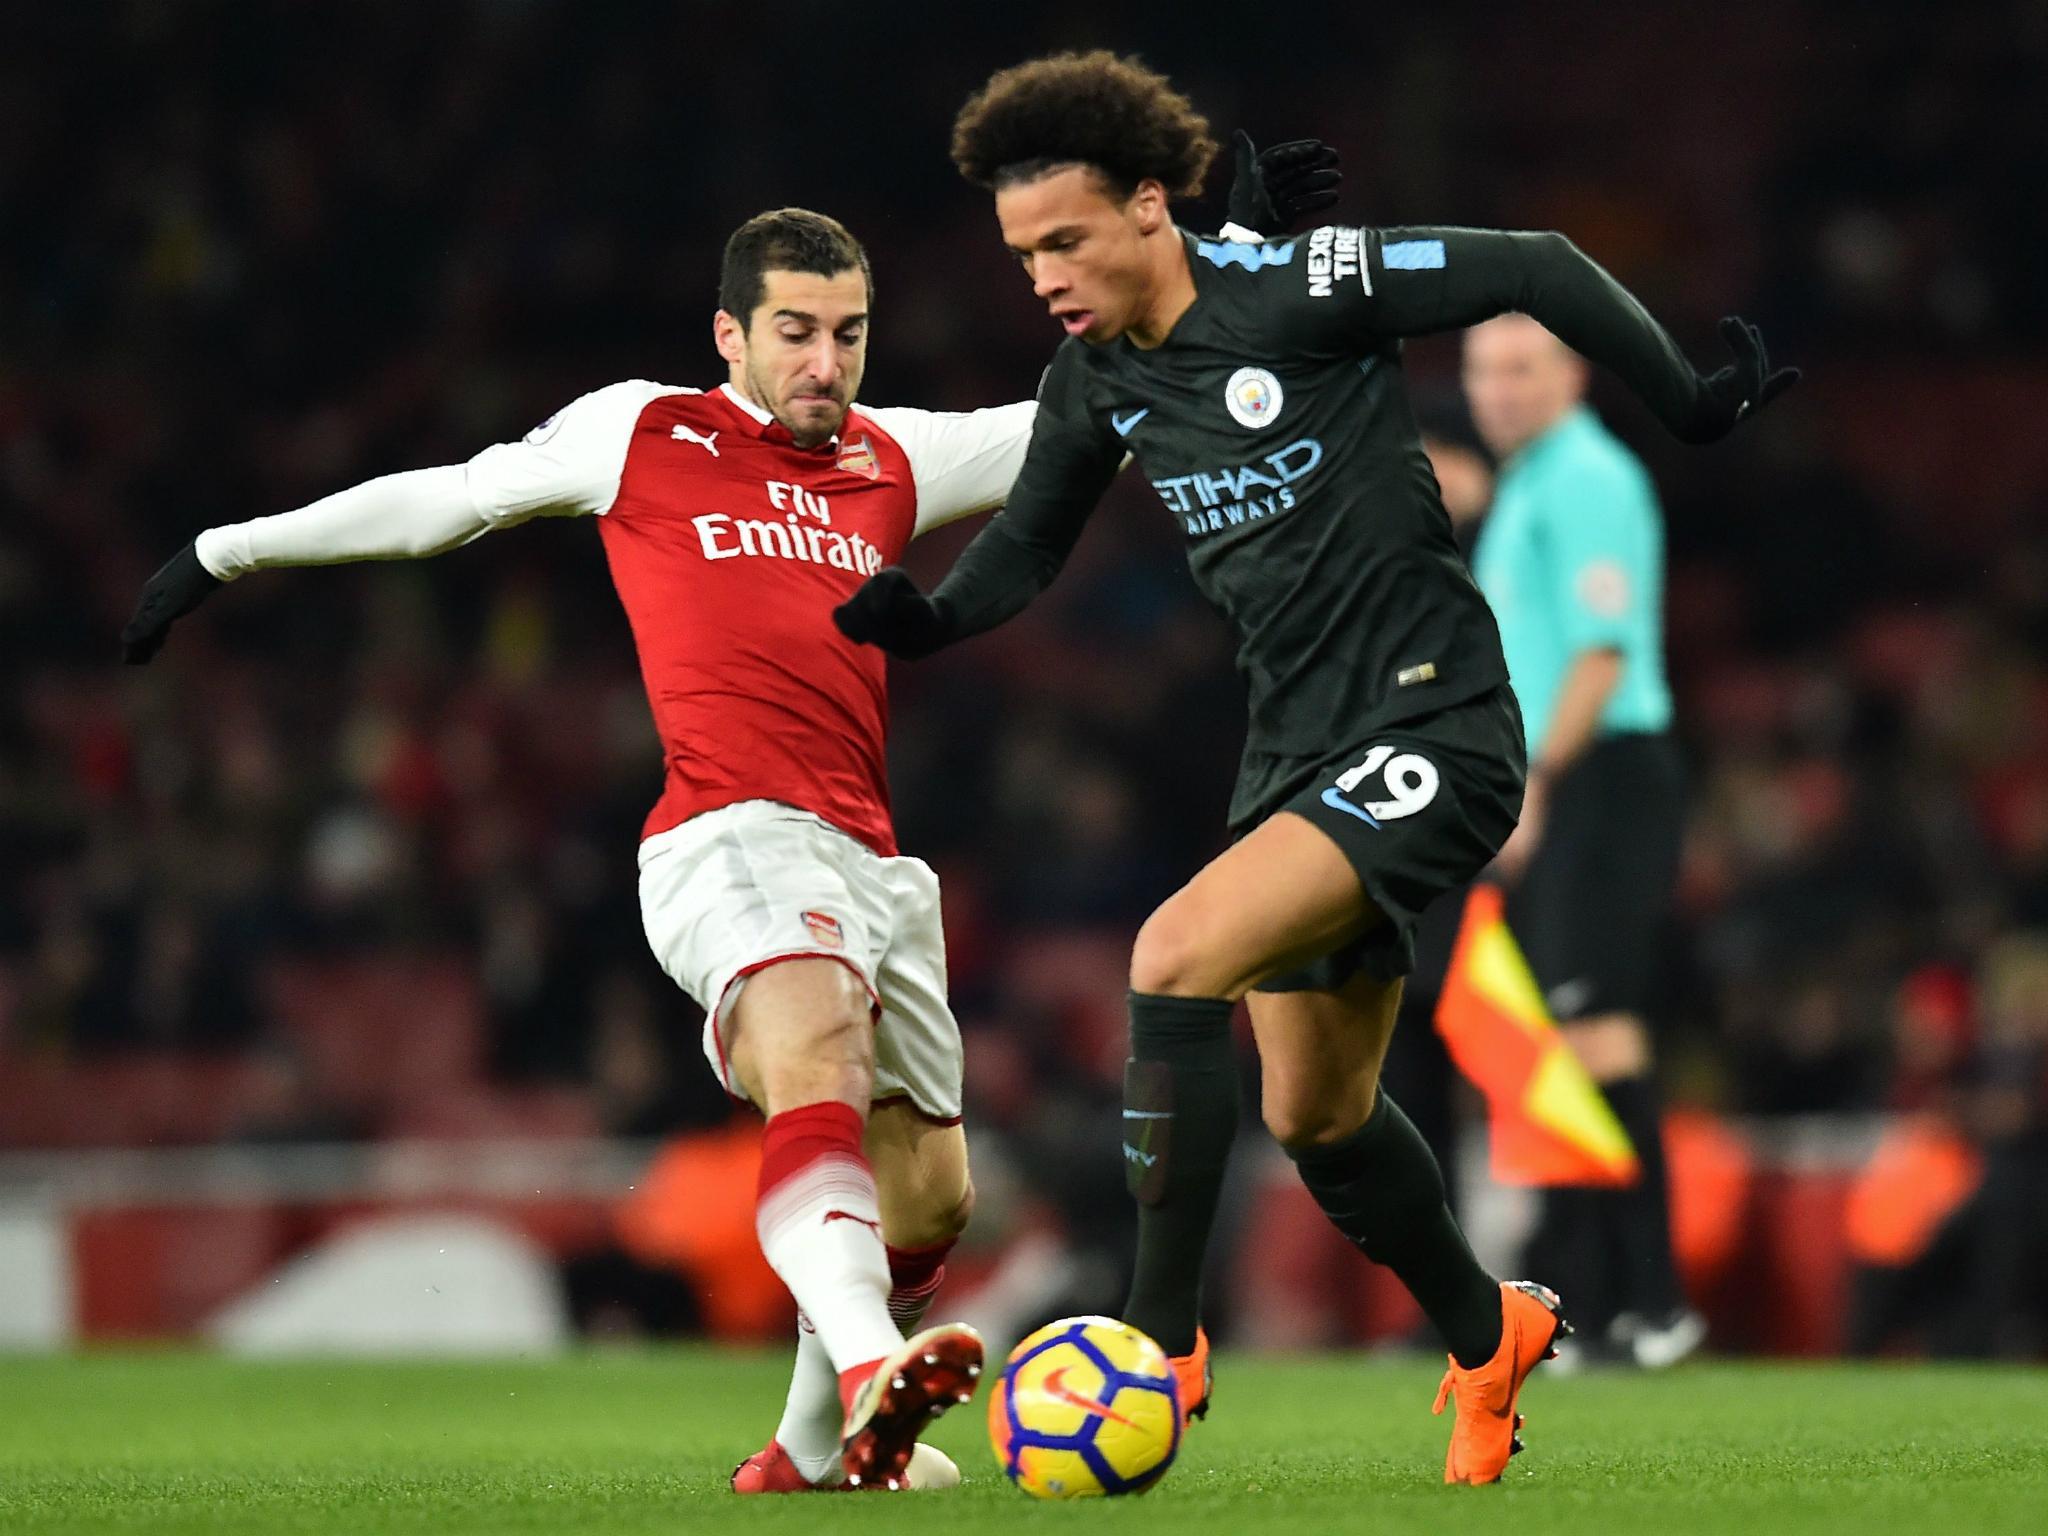 Leroy Sane dazzled against Arsenal as he helped set up two goals before scoring the third himself